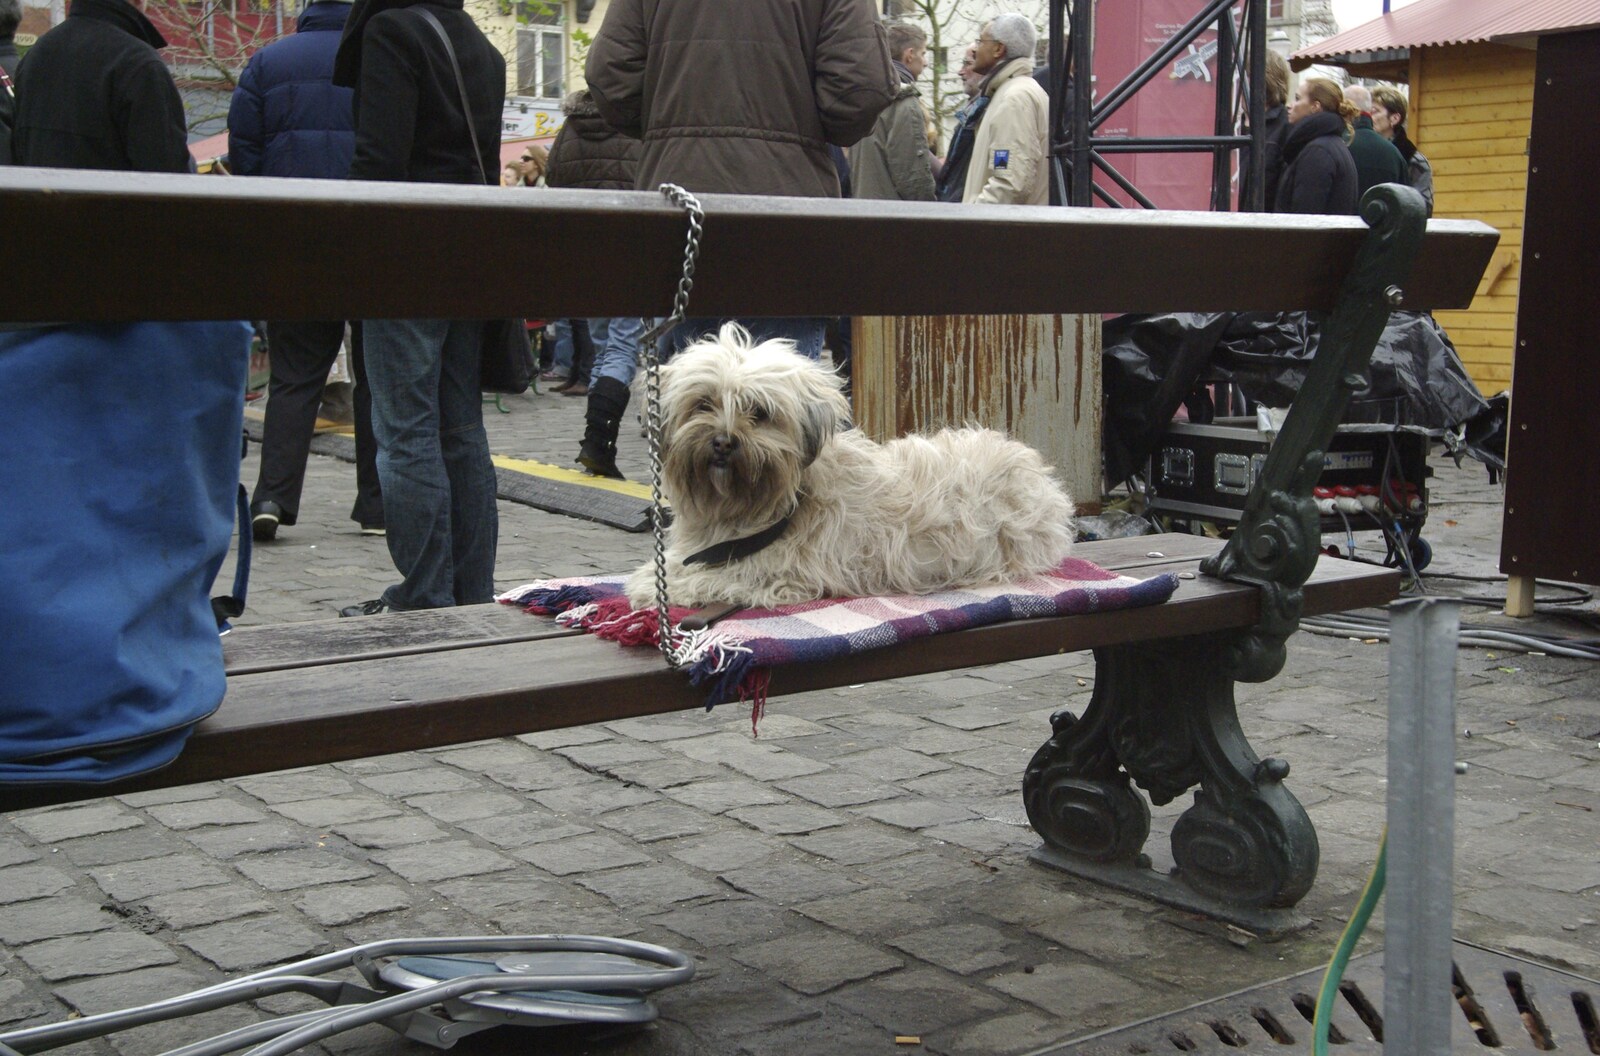 A dog on a bench from The Christmas Markets of Brussels, Belgium - 1st January 2007